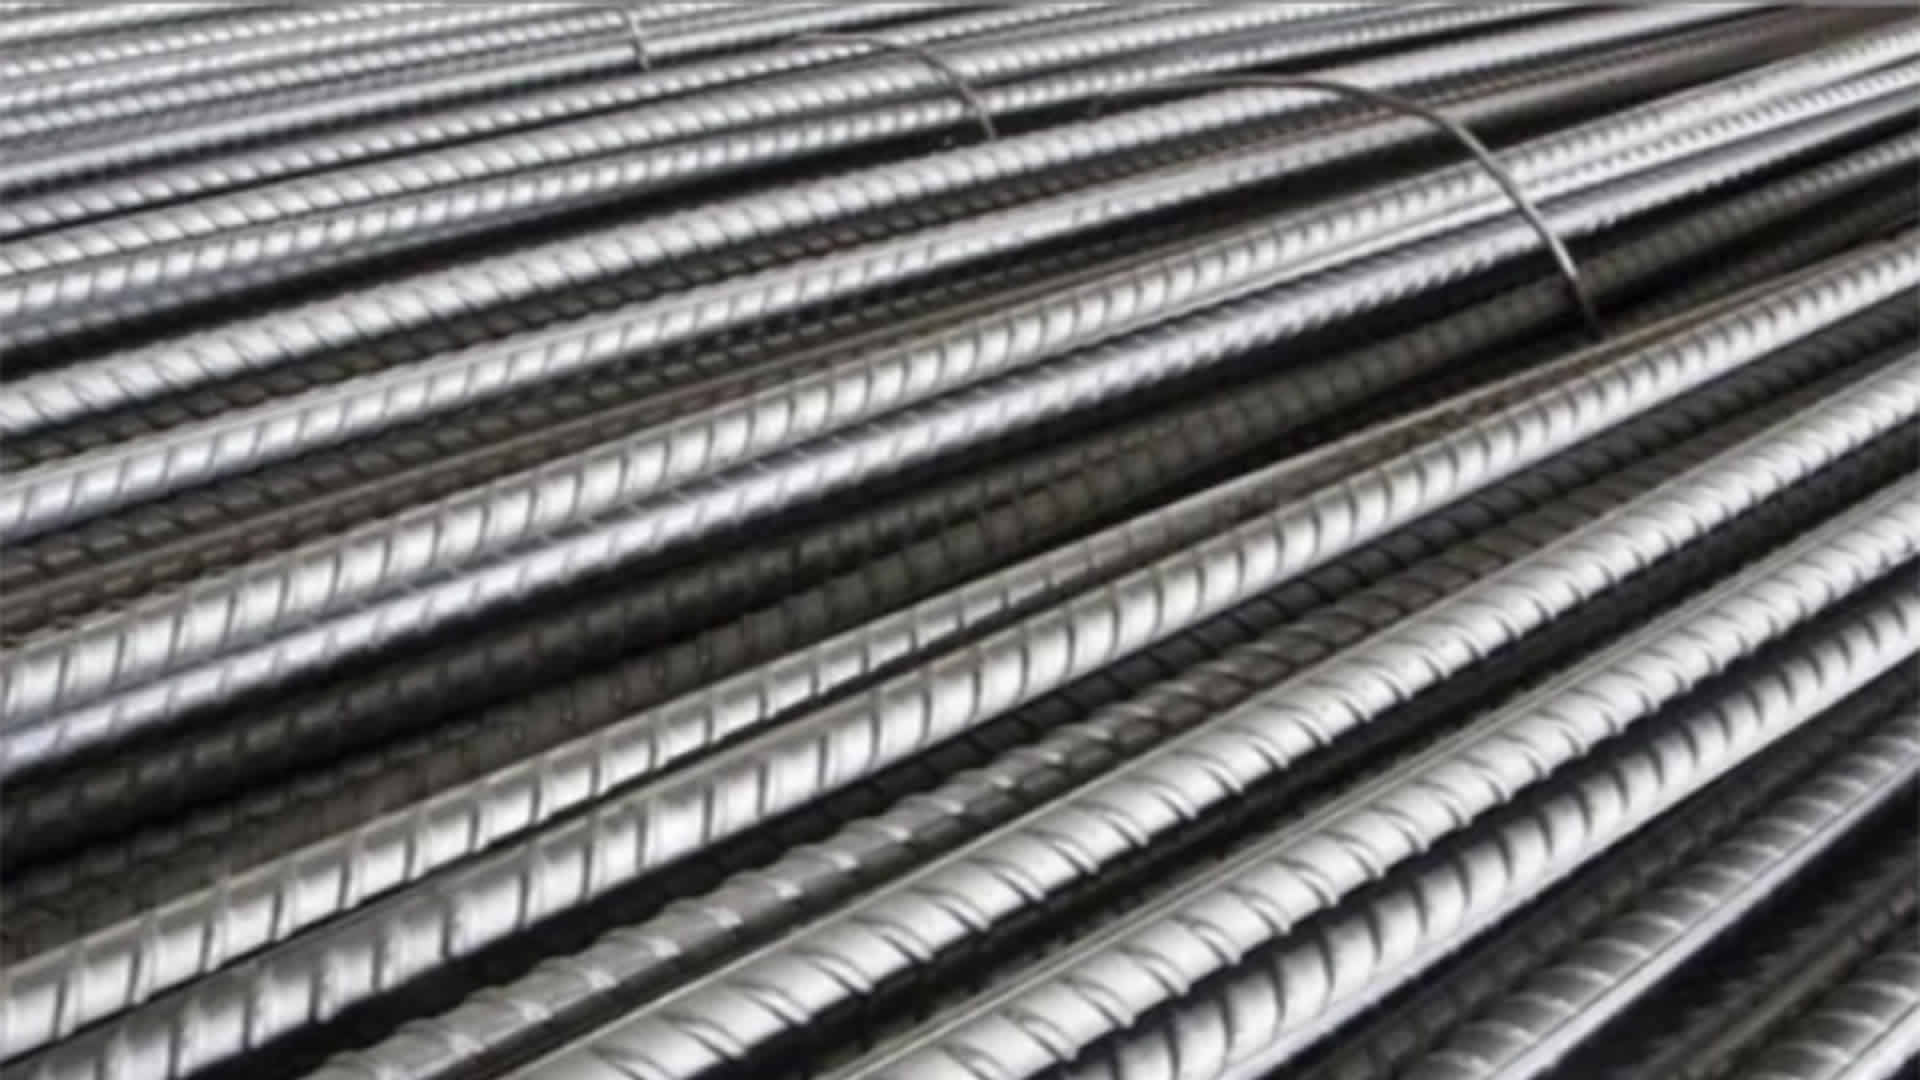 Nigerian Steel 2024 Gas Supply and Pipeline - Iron ore deposits were discovered in Nigeria in the 1950s, sparking plans for domestic steel production.